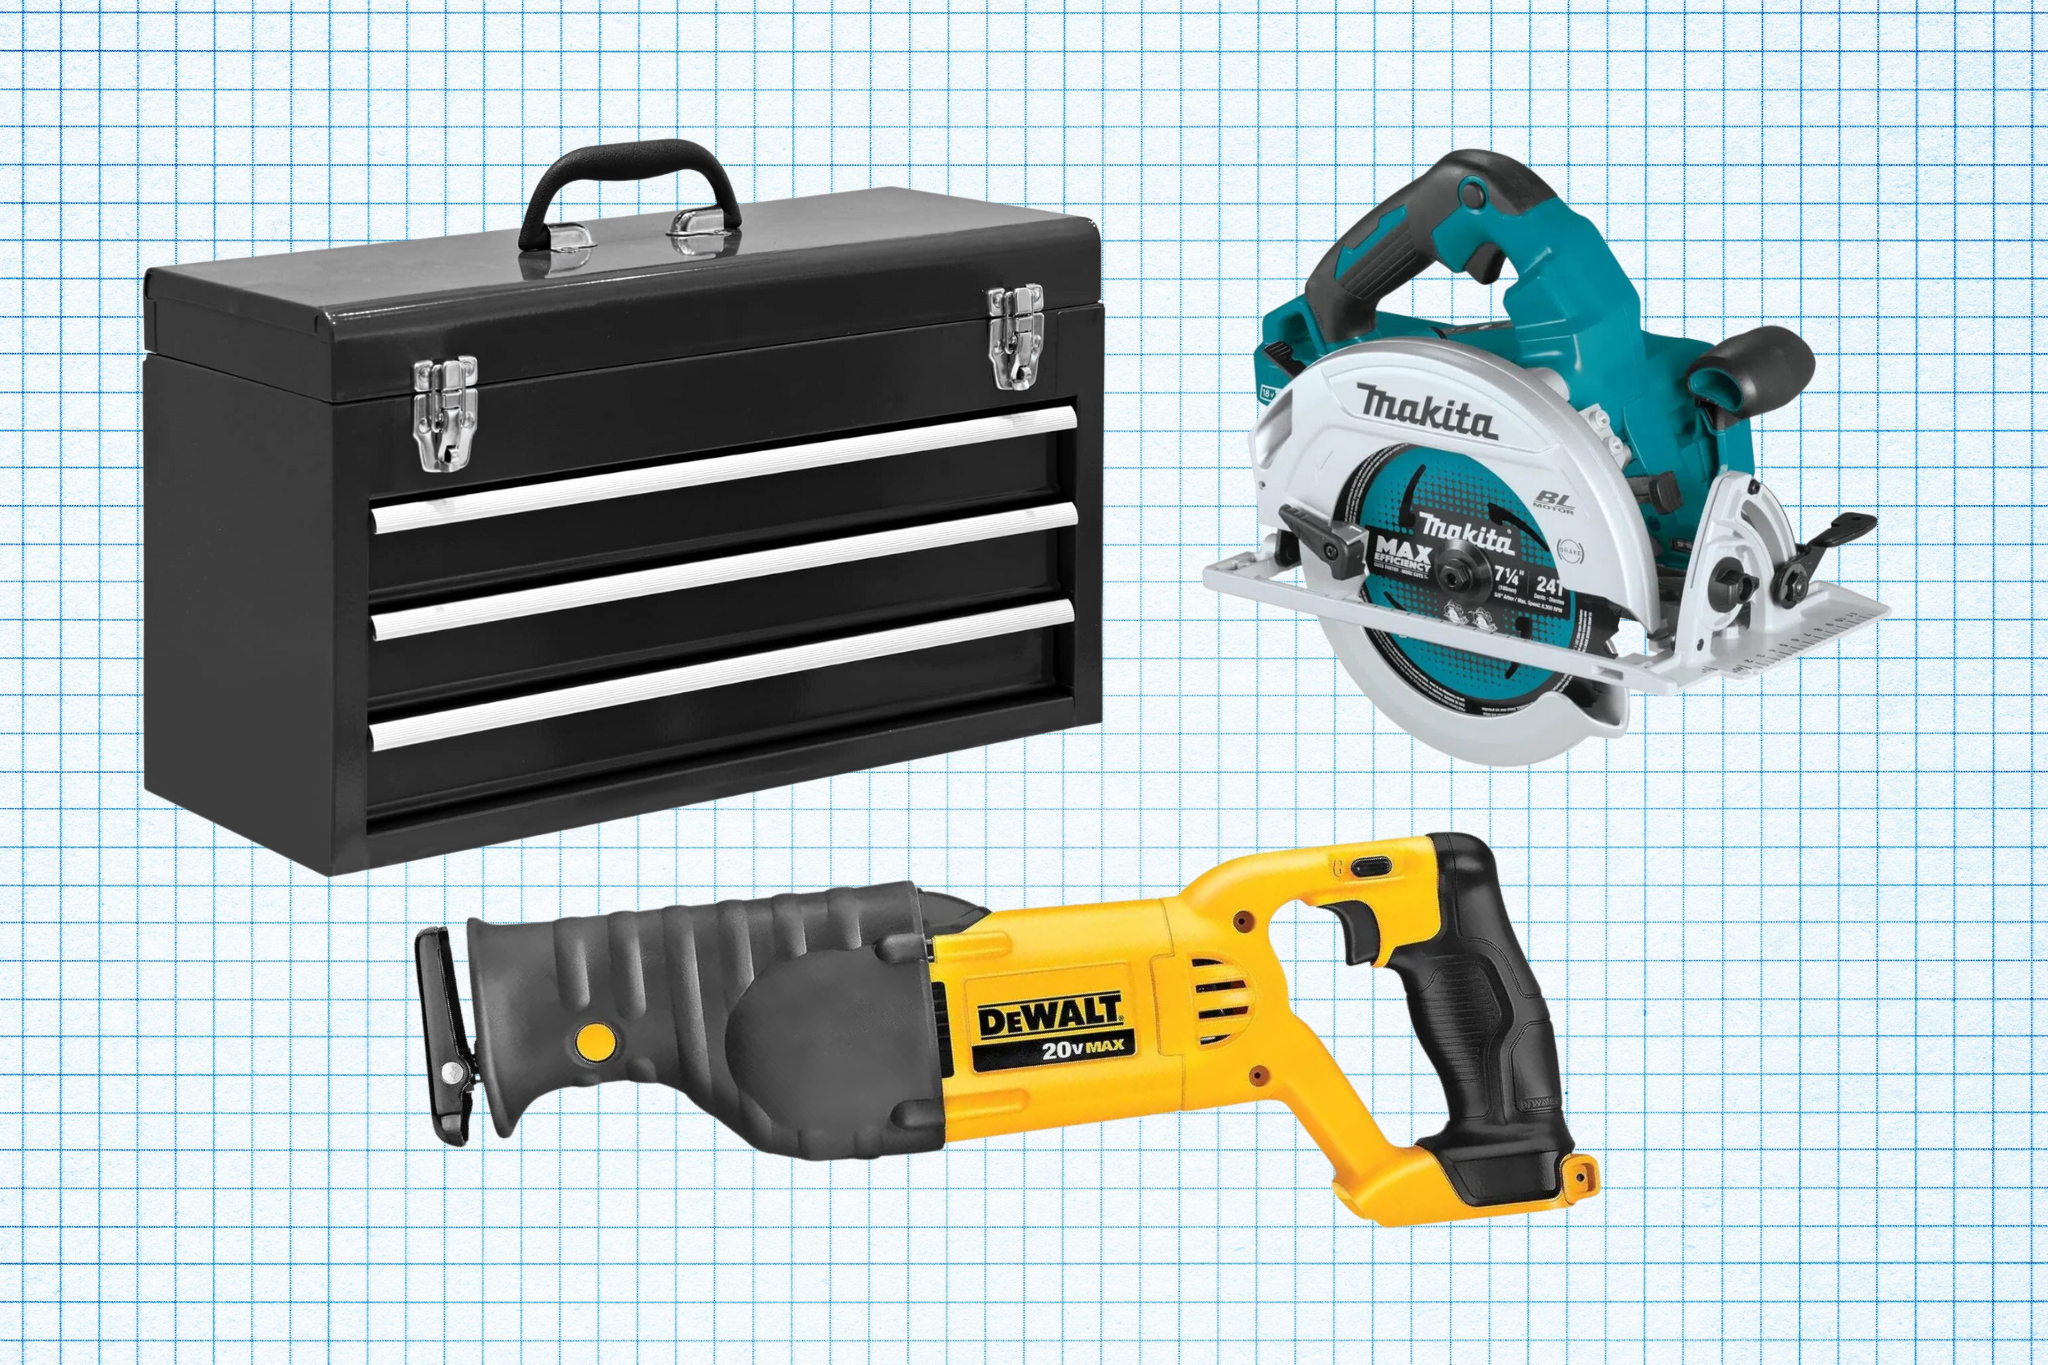 A black toolbox, Makita cordless circular saw, and DEWALT reciprocatig saw against a blue graph paper background. Lead image for Best Labor Day Tool Sales Guide.